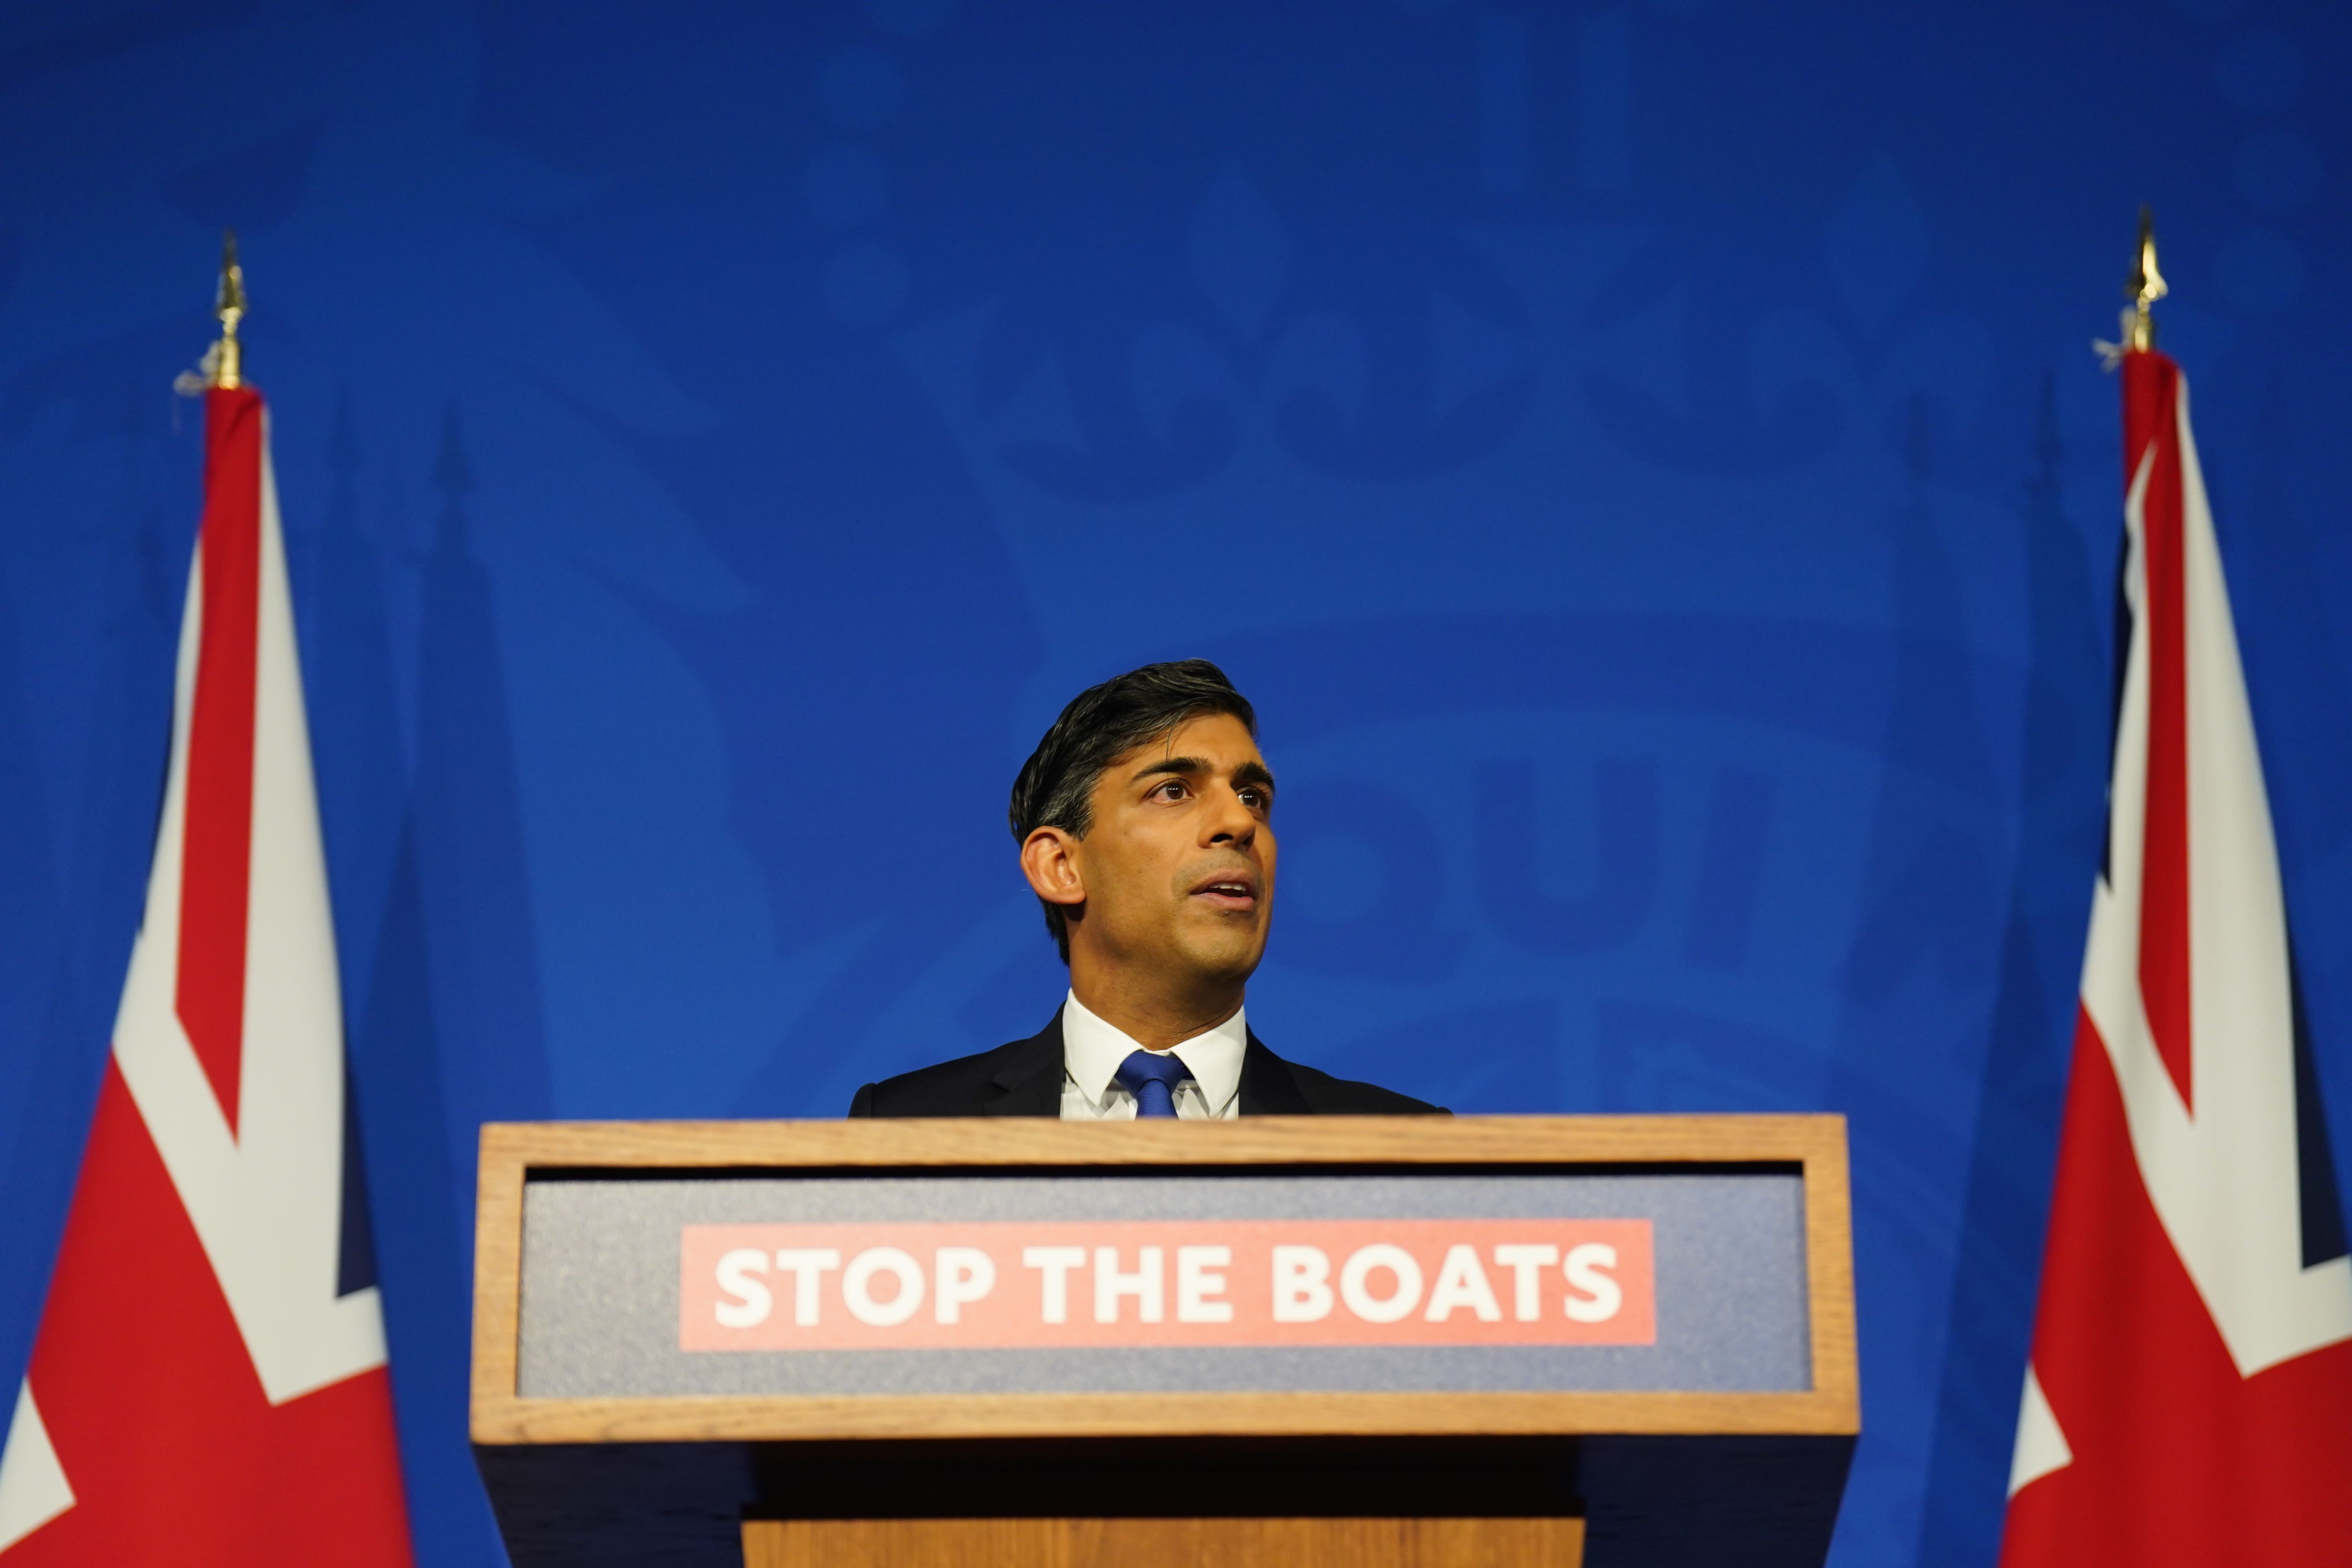 Rishi Sunak is under pressure to cut both legal and illegal migration